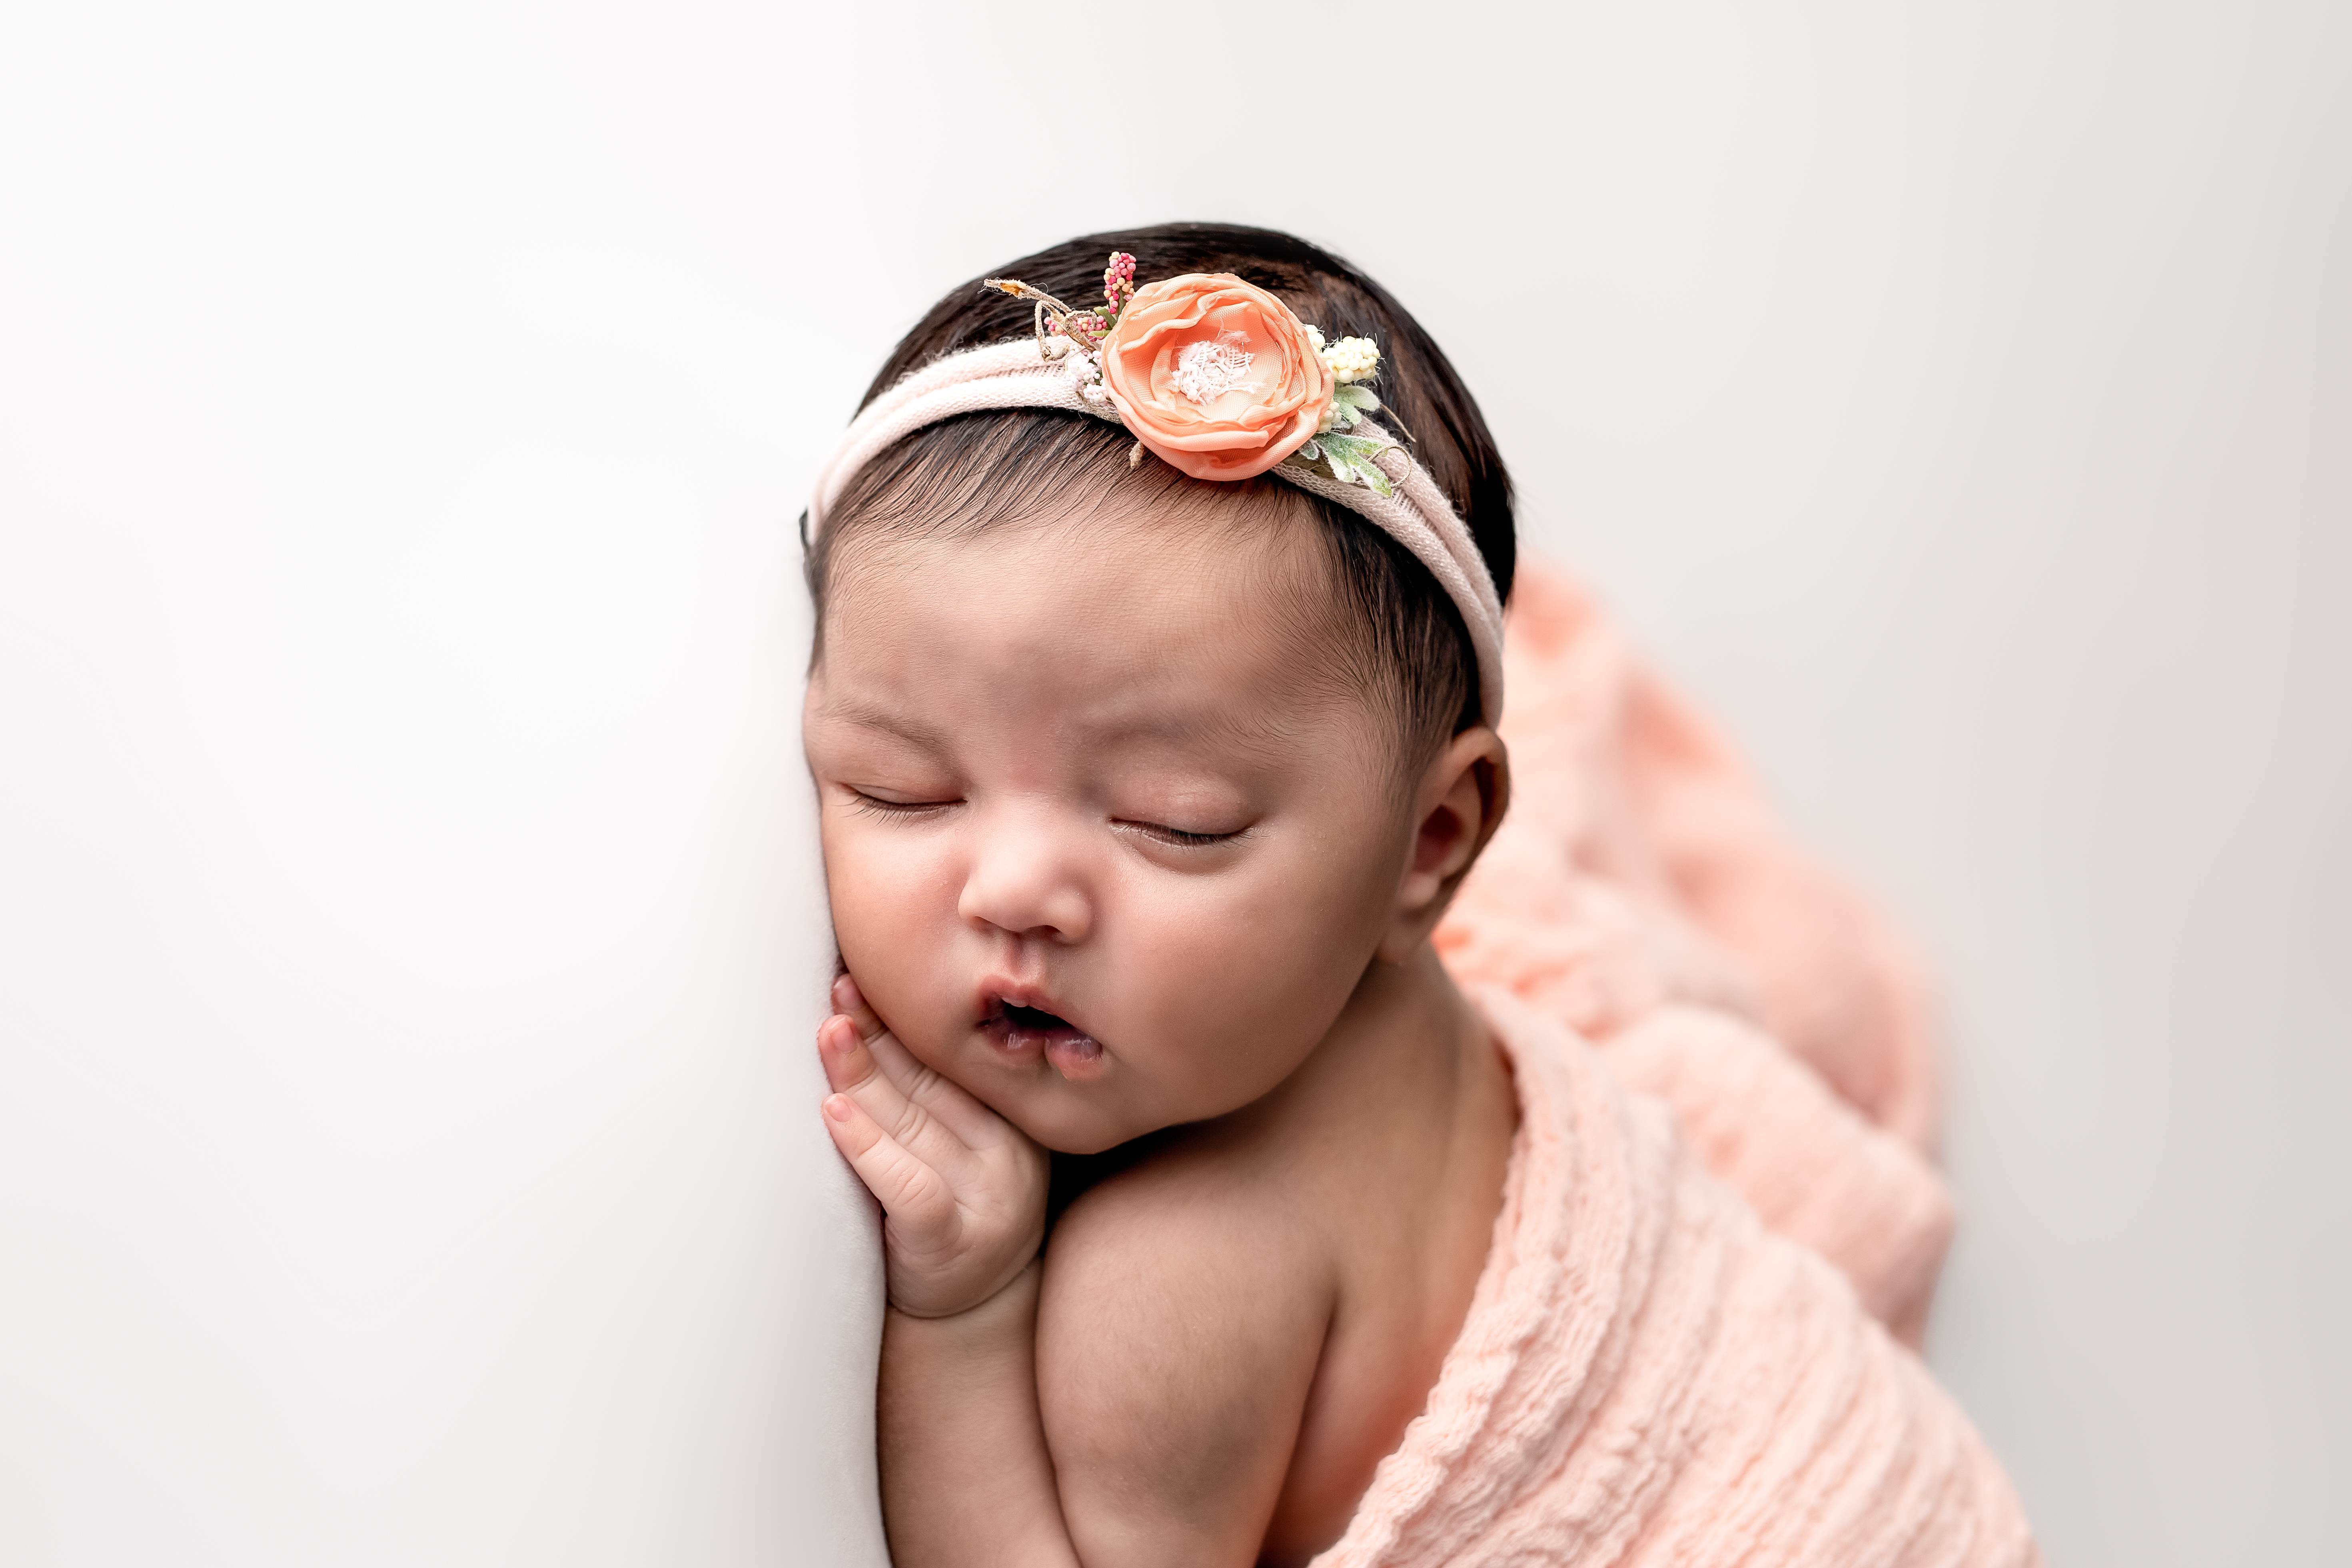 a photo from a Newborn Session with Kristin Tiffany Photography